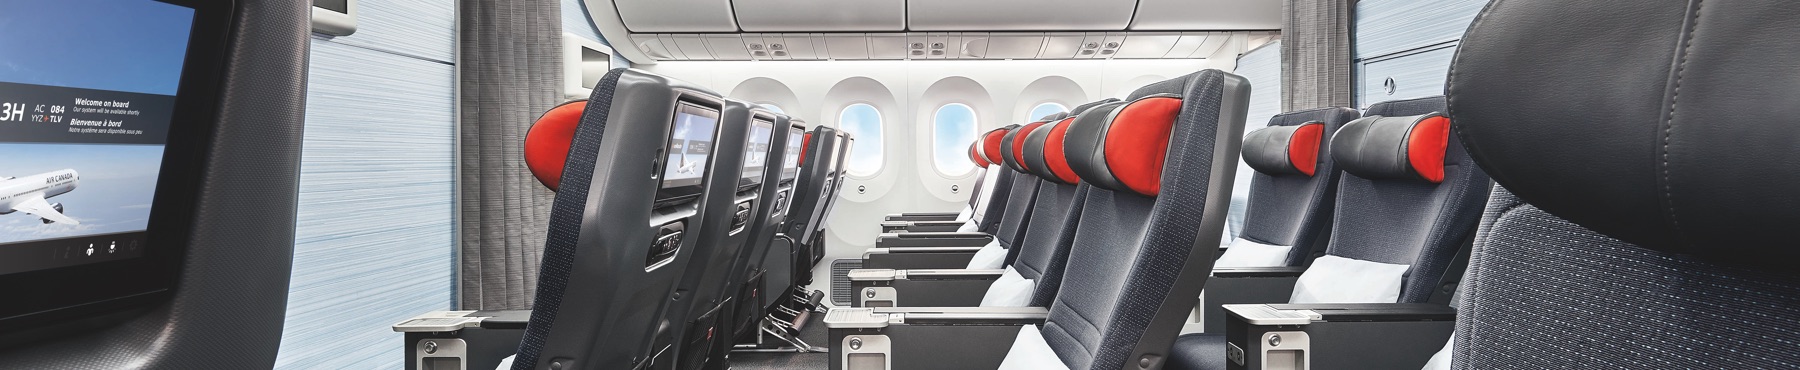 Feel pampered in our Premium Economy Class.